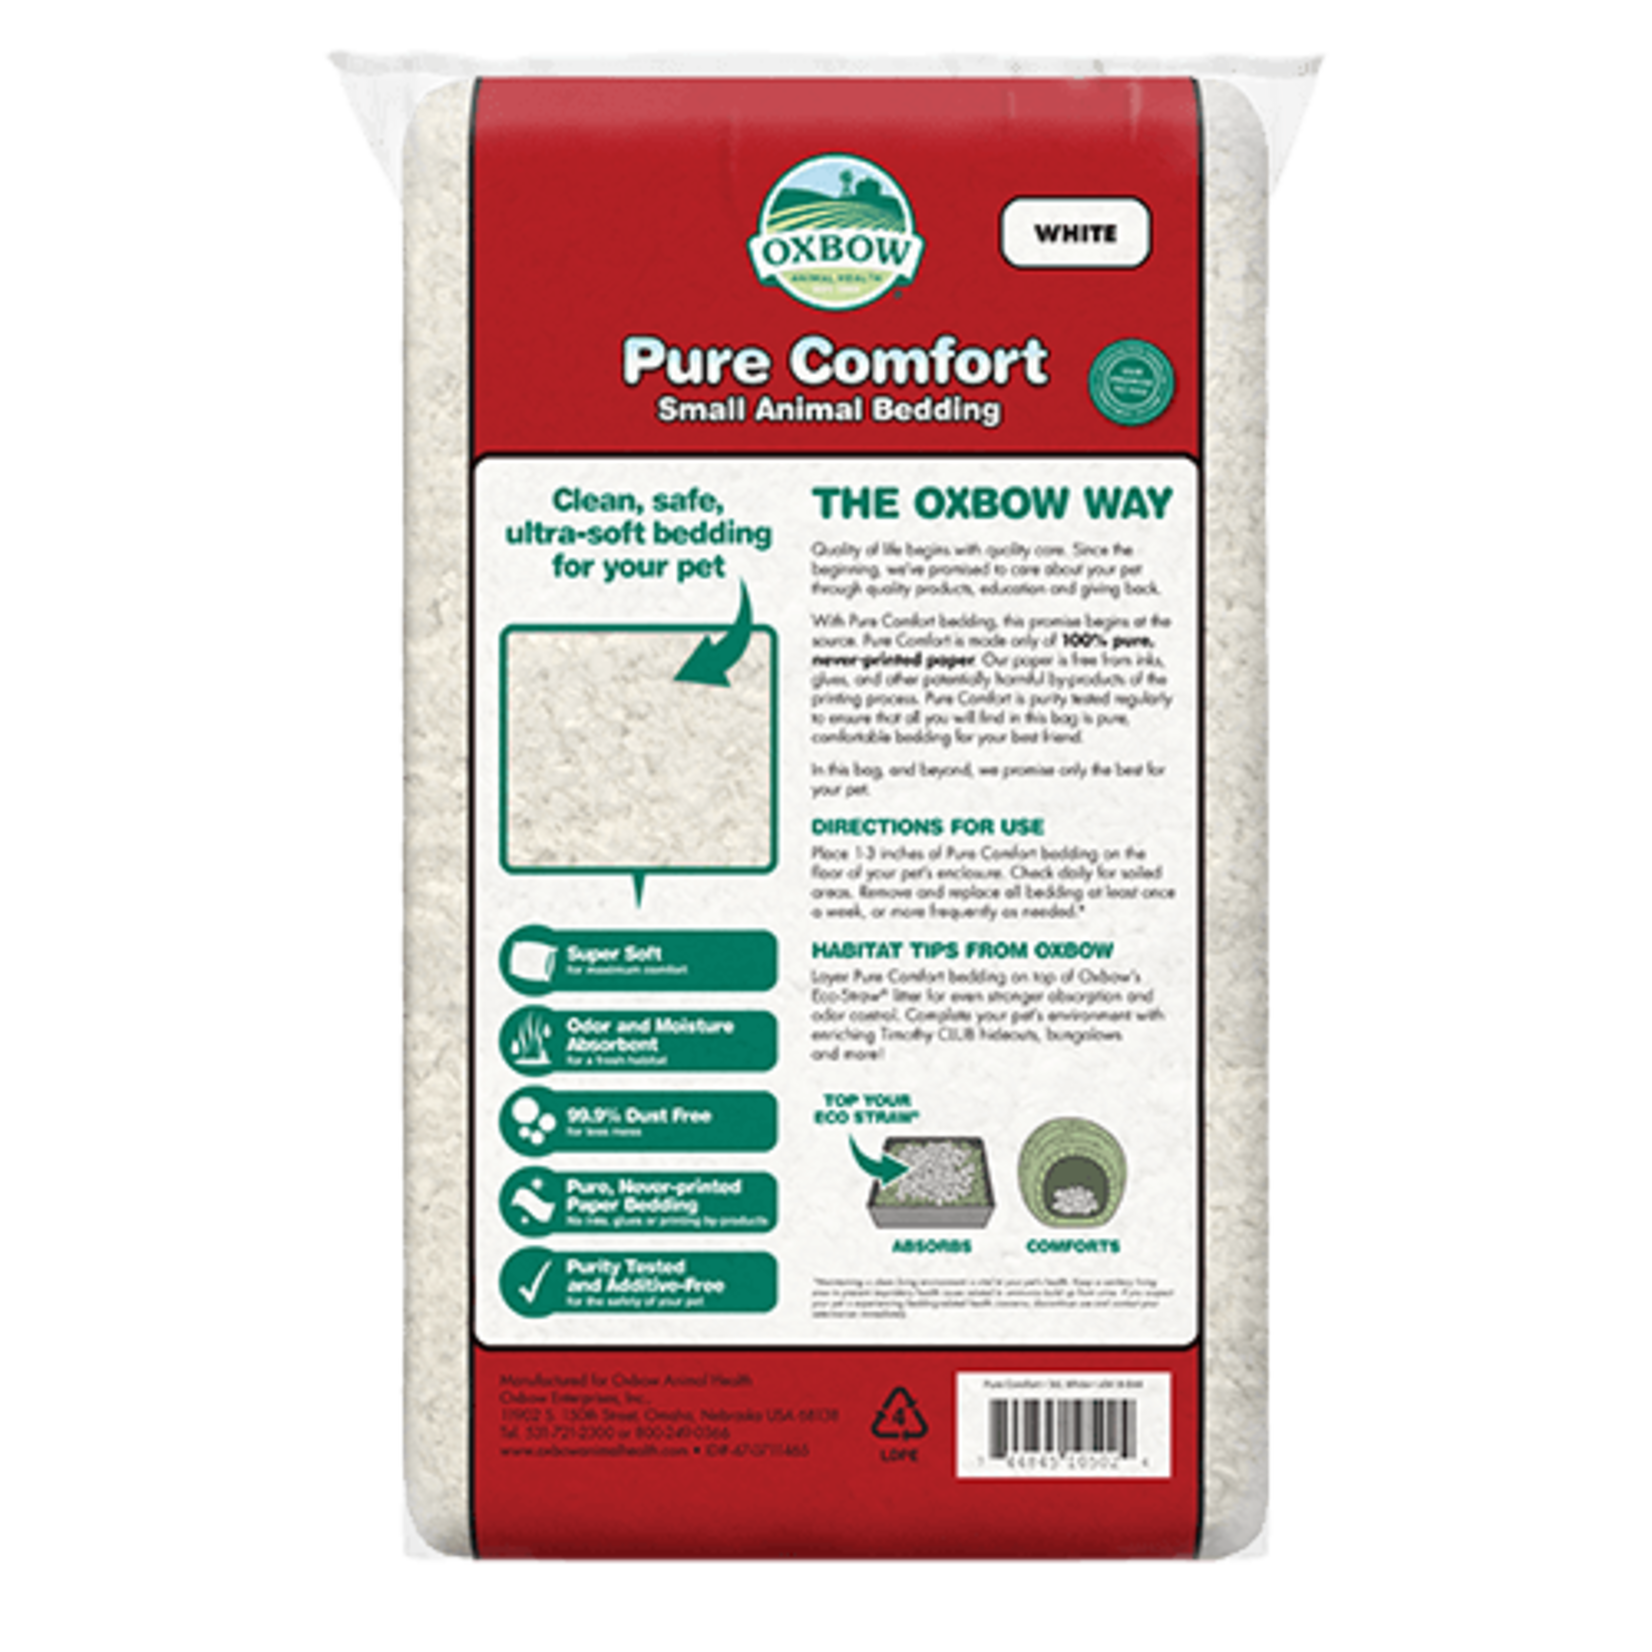 OXBOW Oxbow Pure Comfort - White Small Animal Bedding 72L